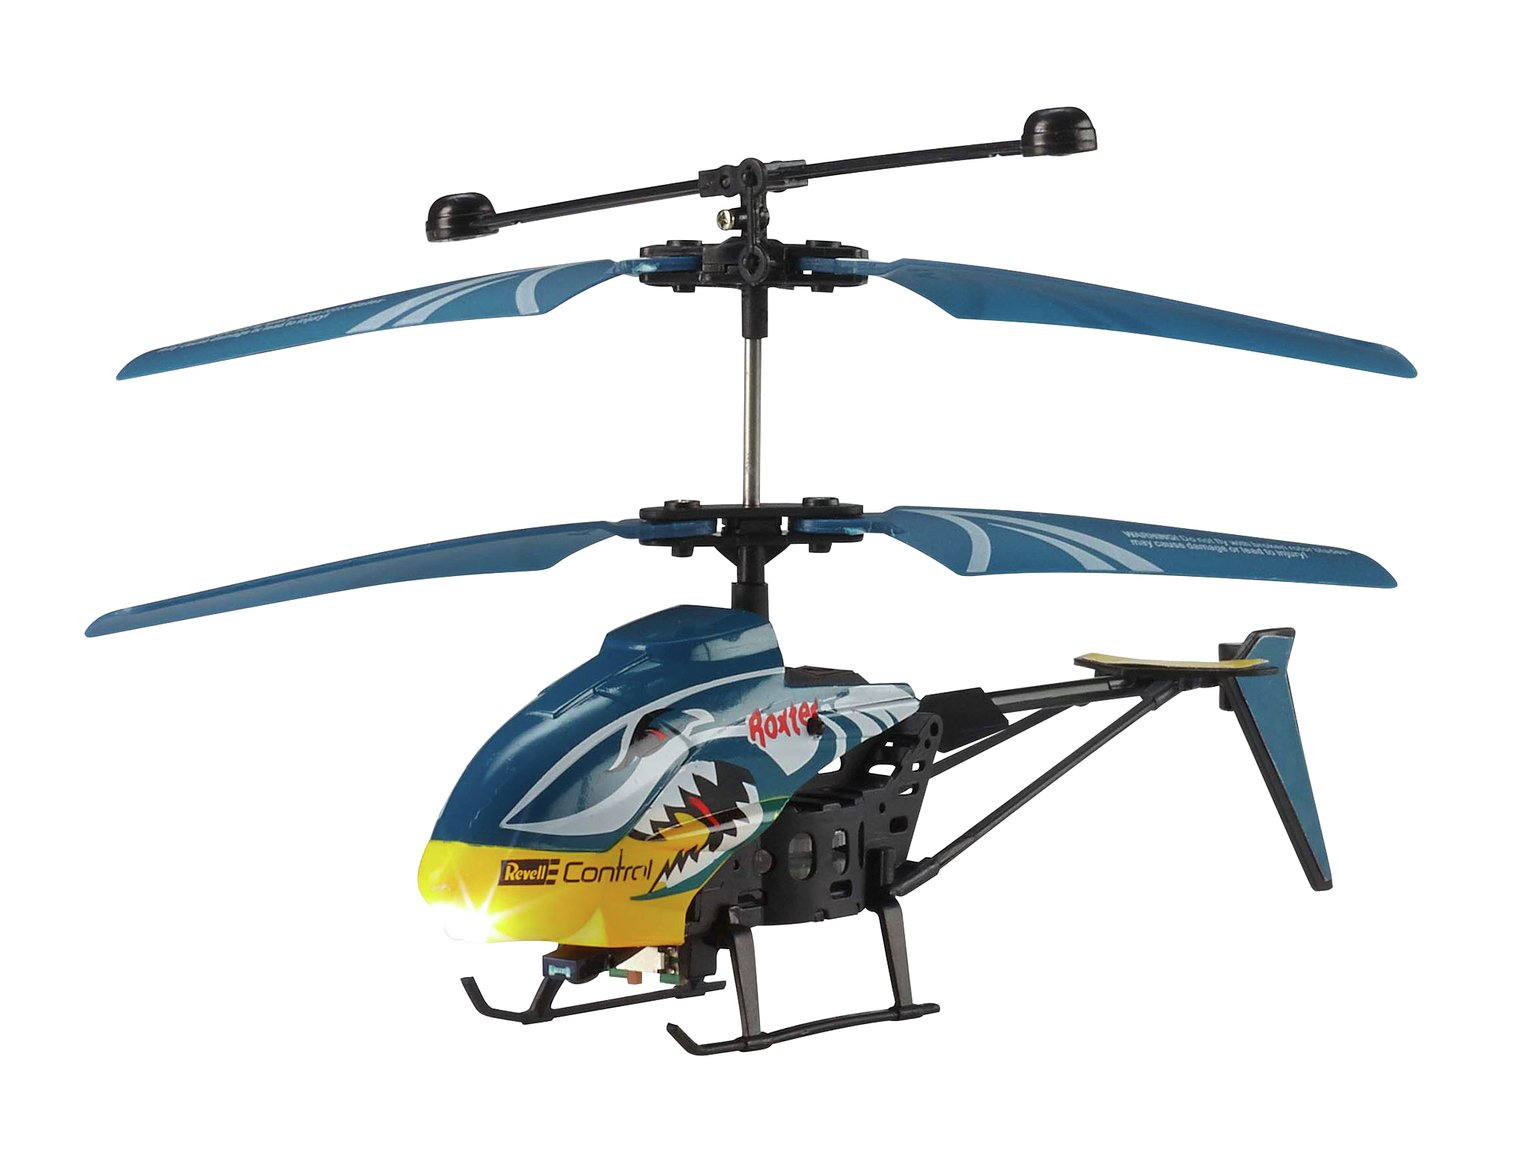 Revell Roxter Control Radio Controlled Helicopter review